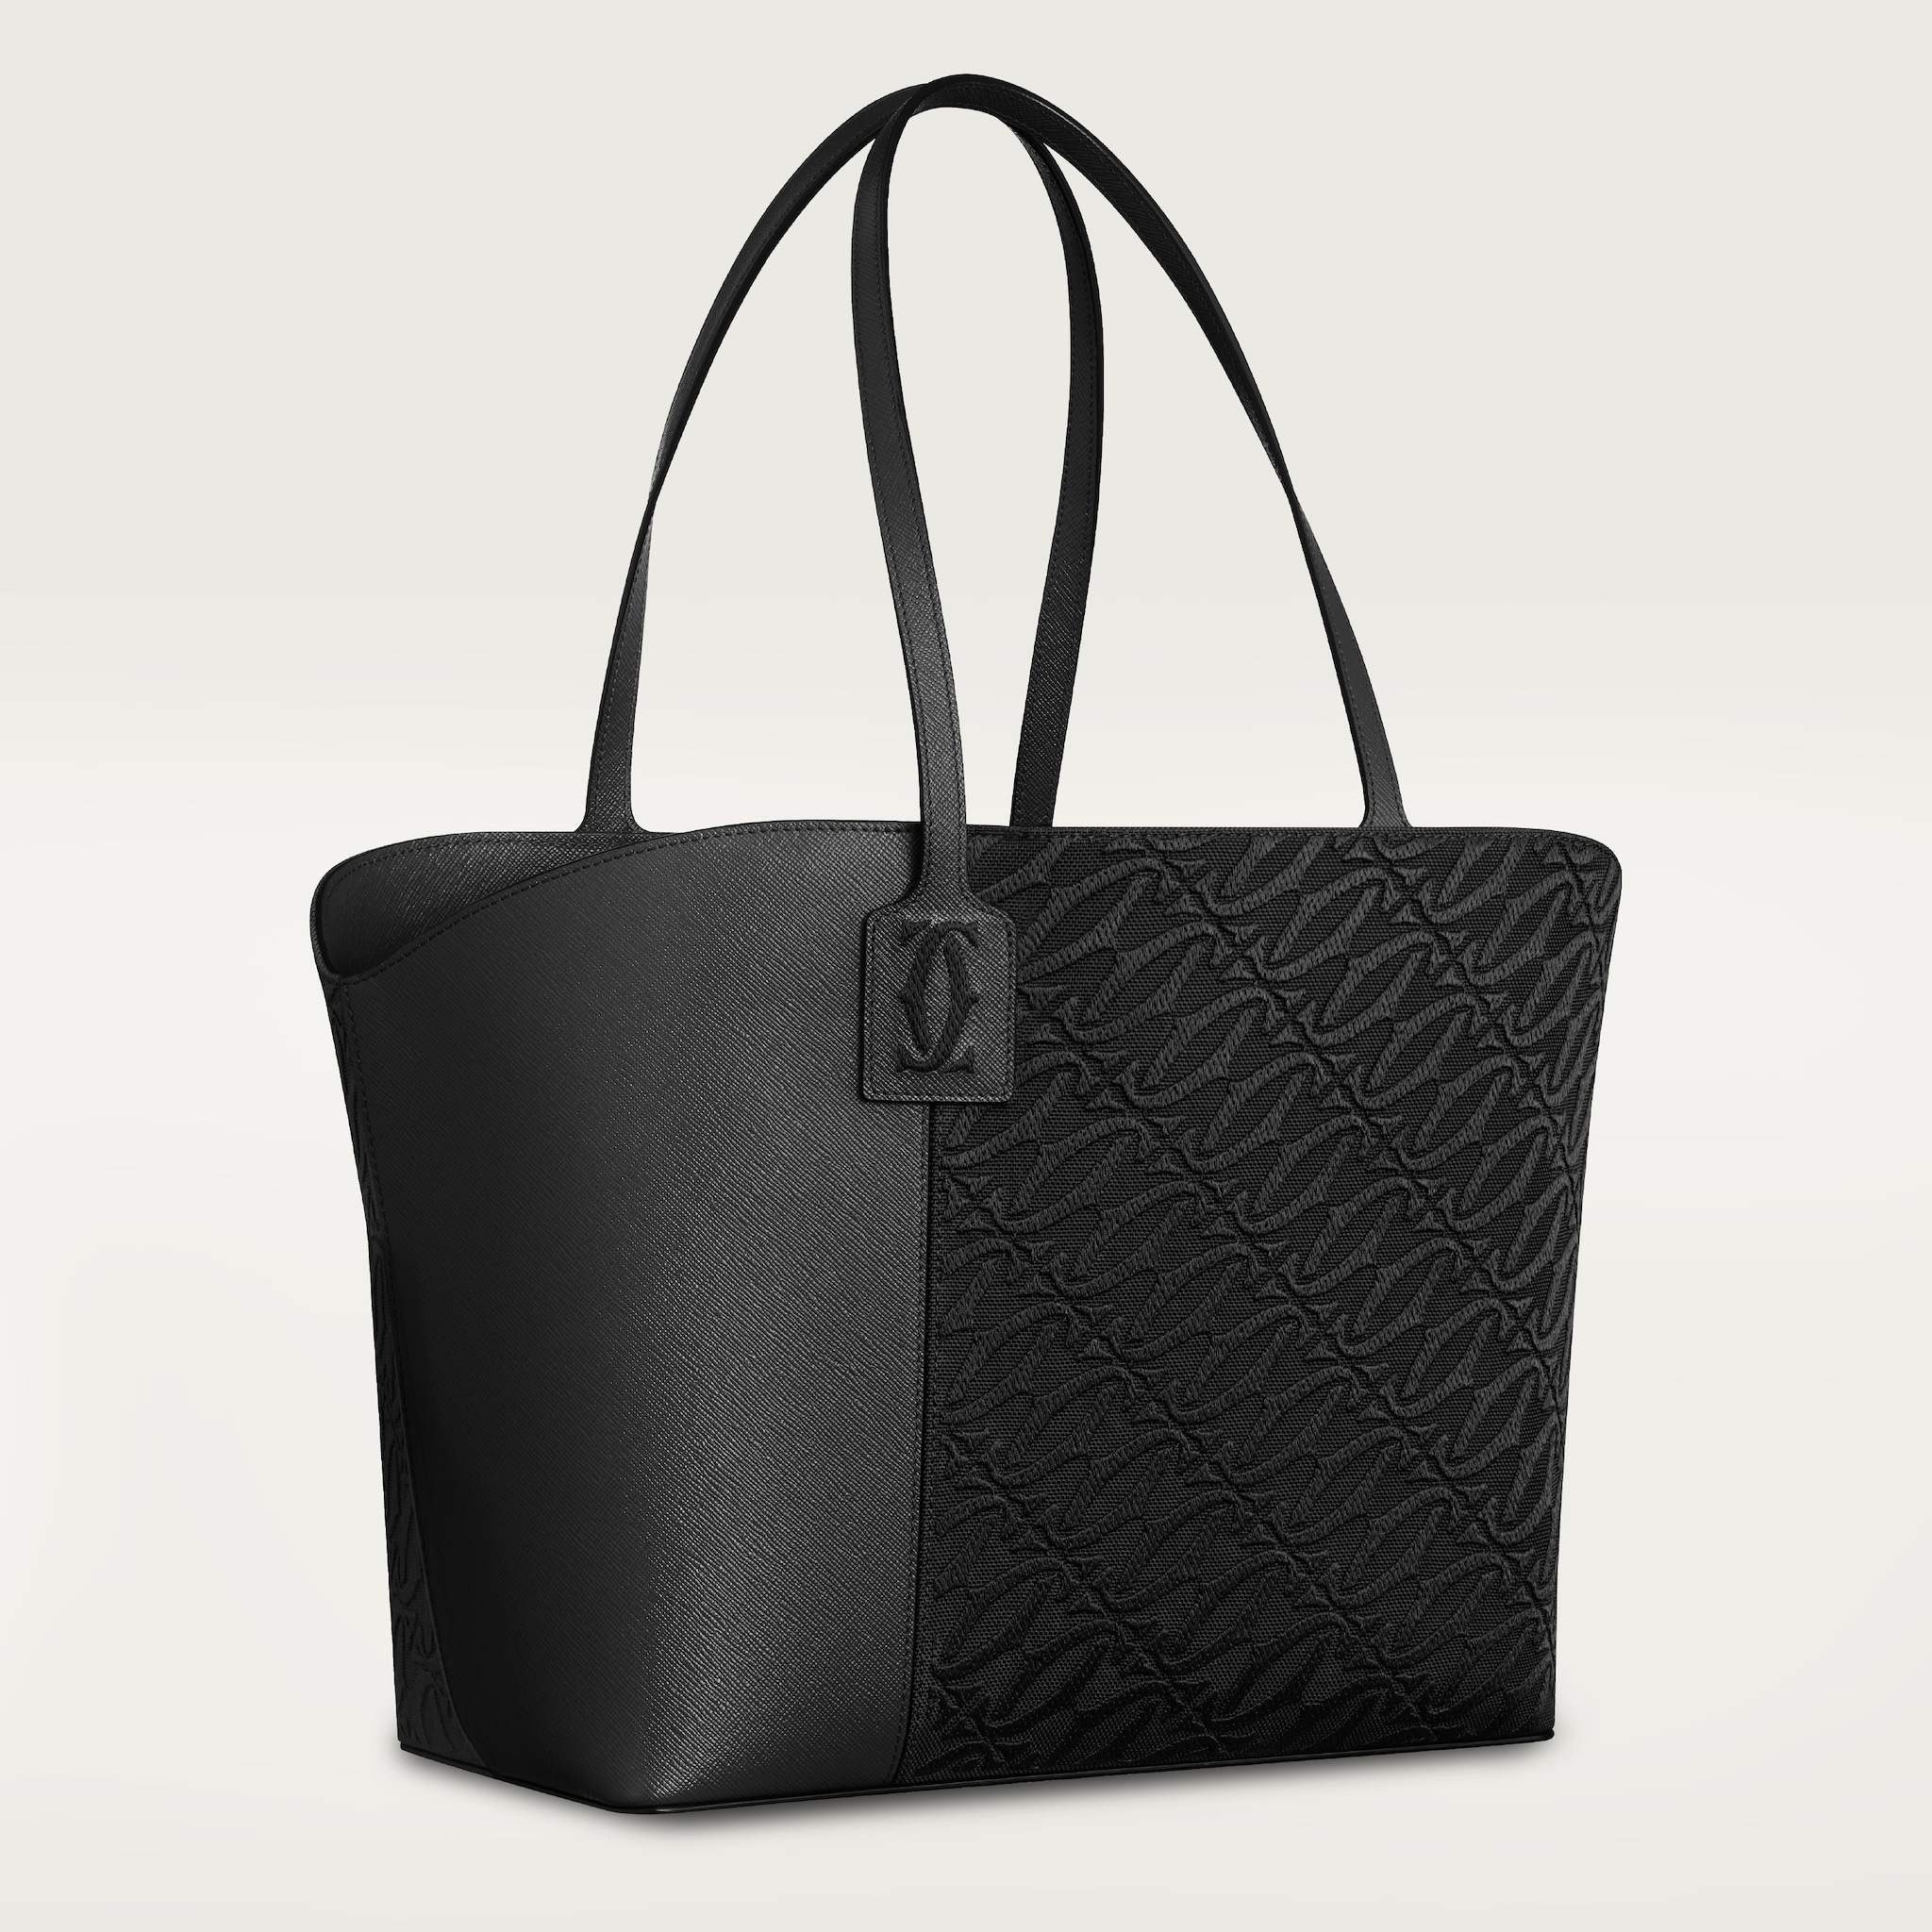 Tote bag, C de CartierBlack textured calfskin and embroidery, golden finish